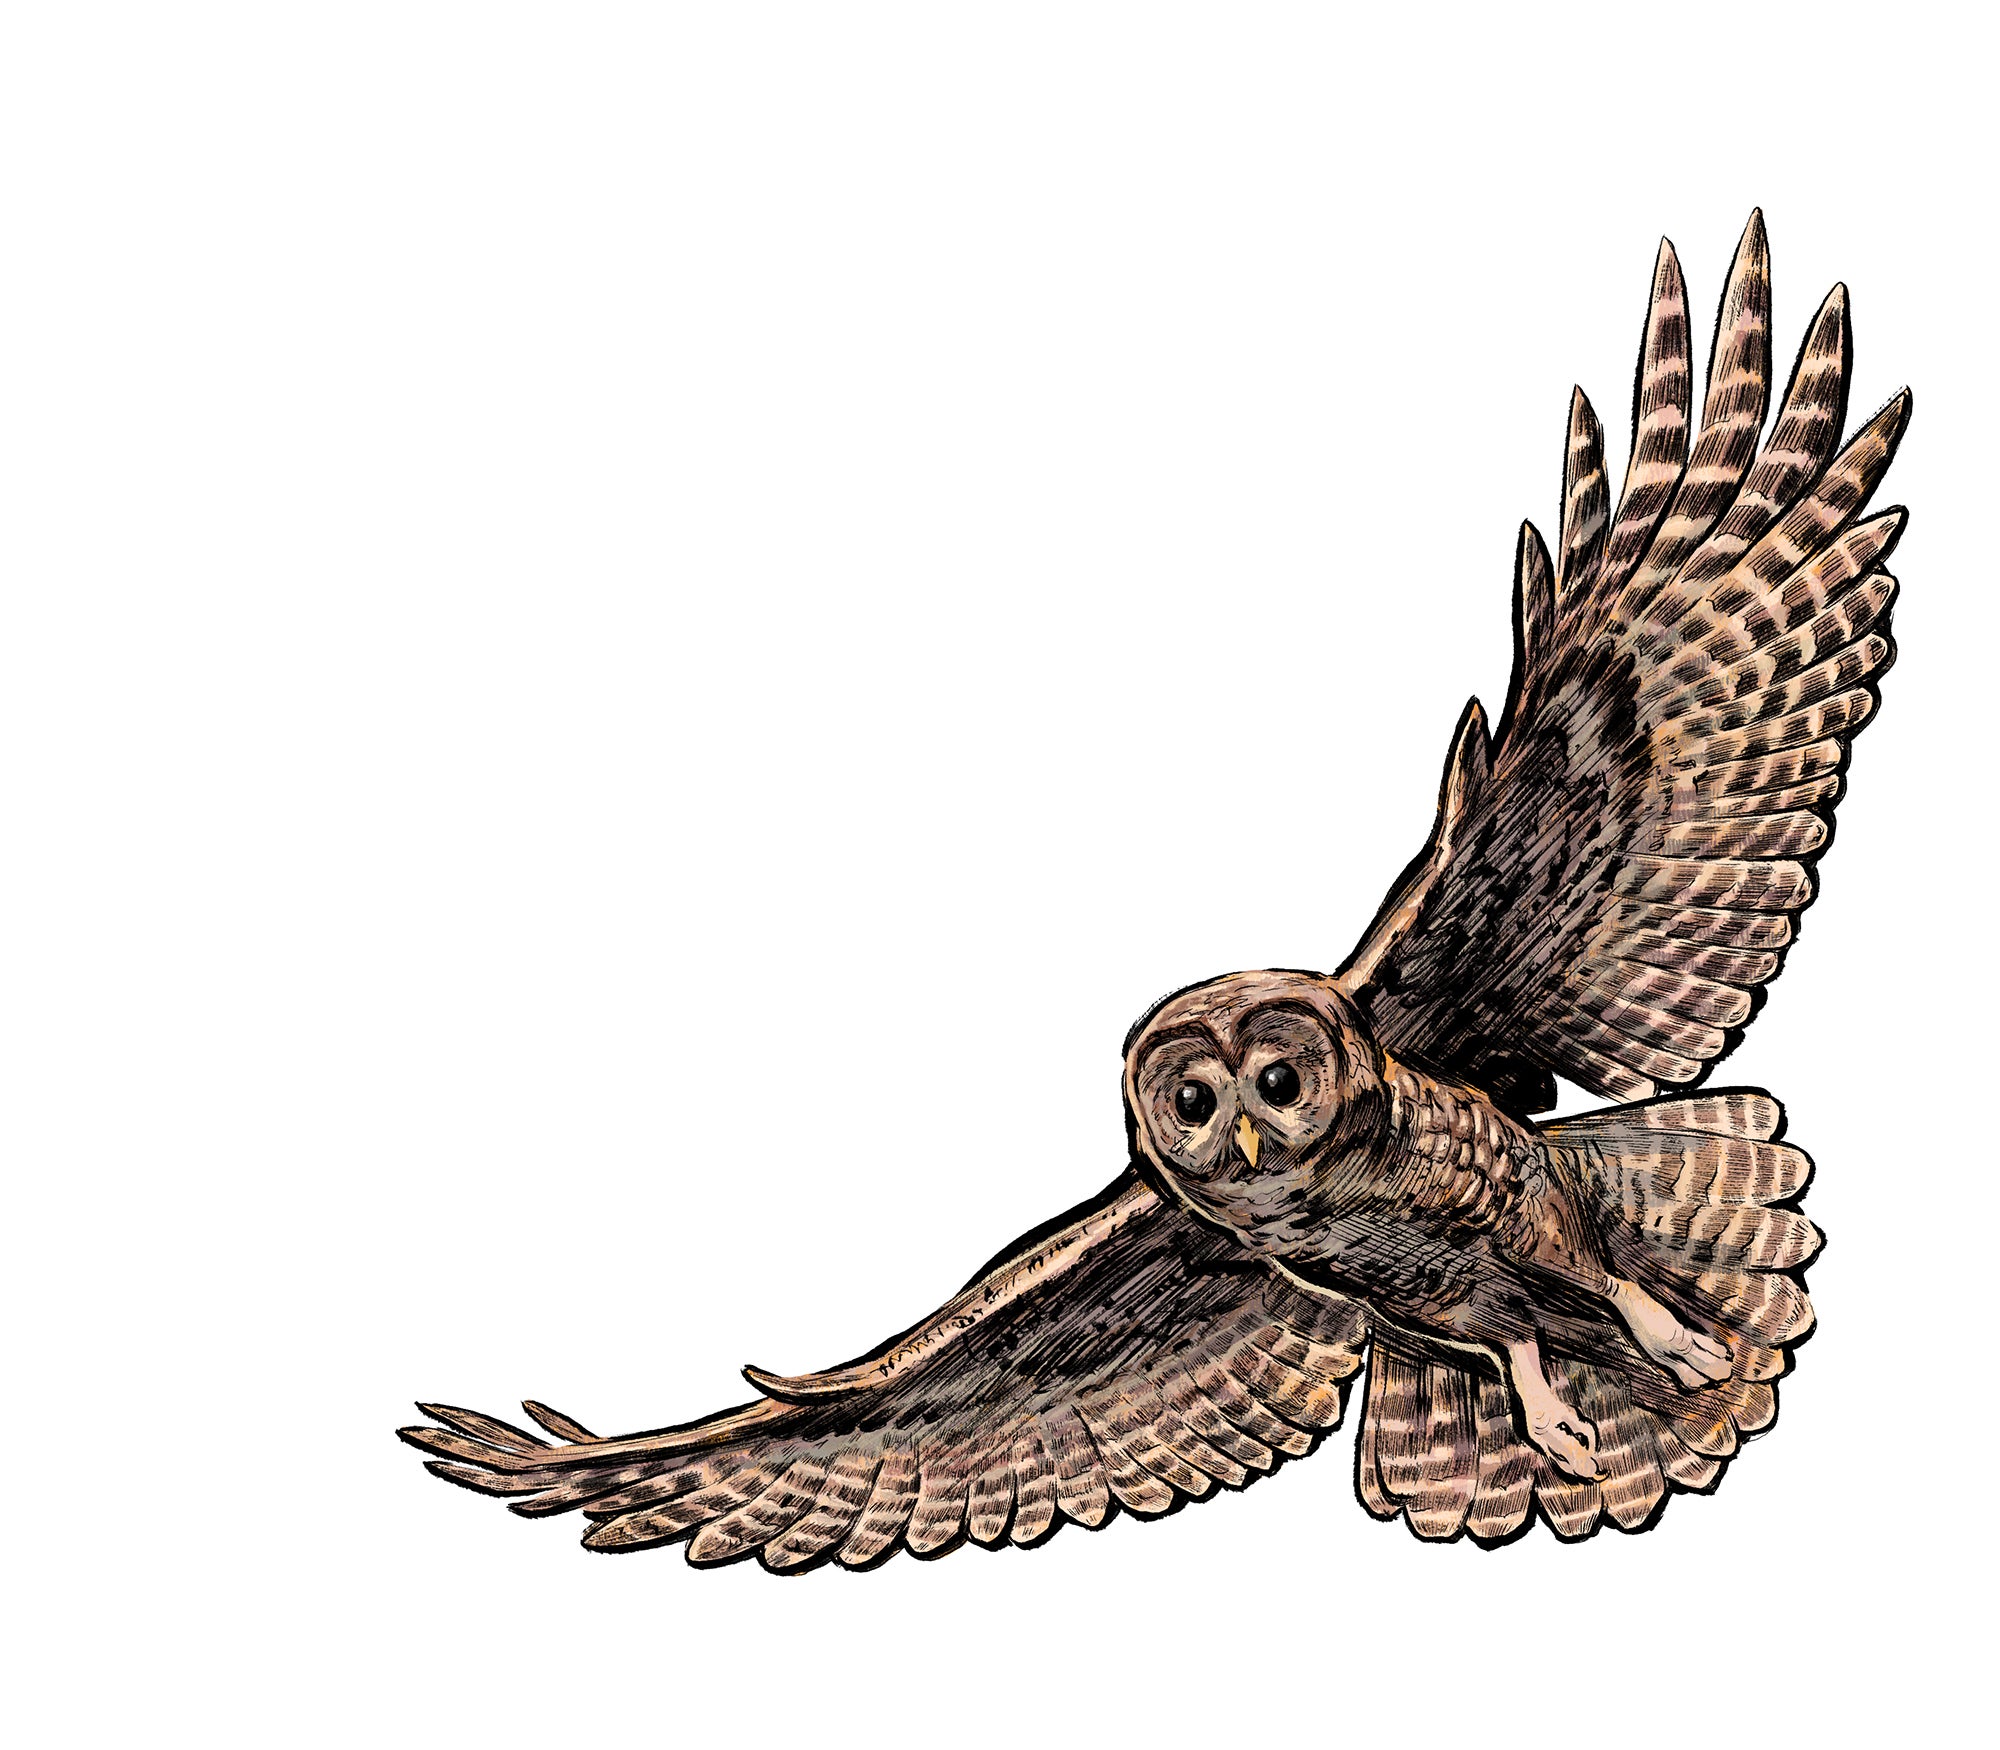 Illustration of the California spotted owl flying with its wings spread.